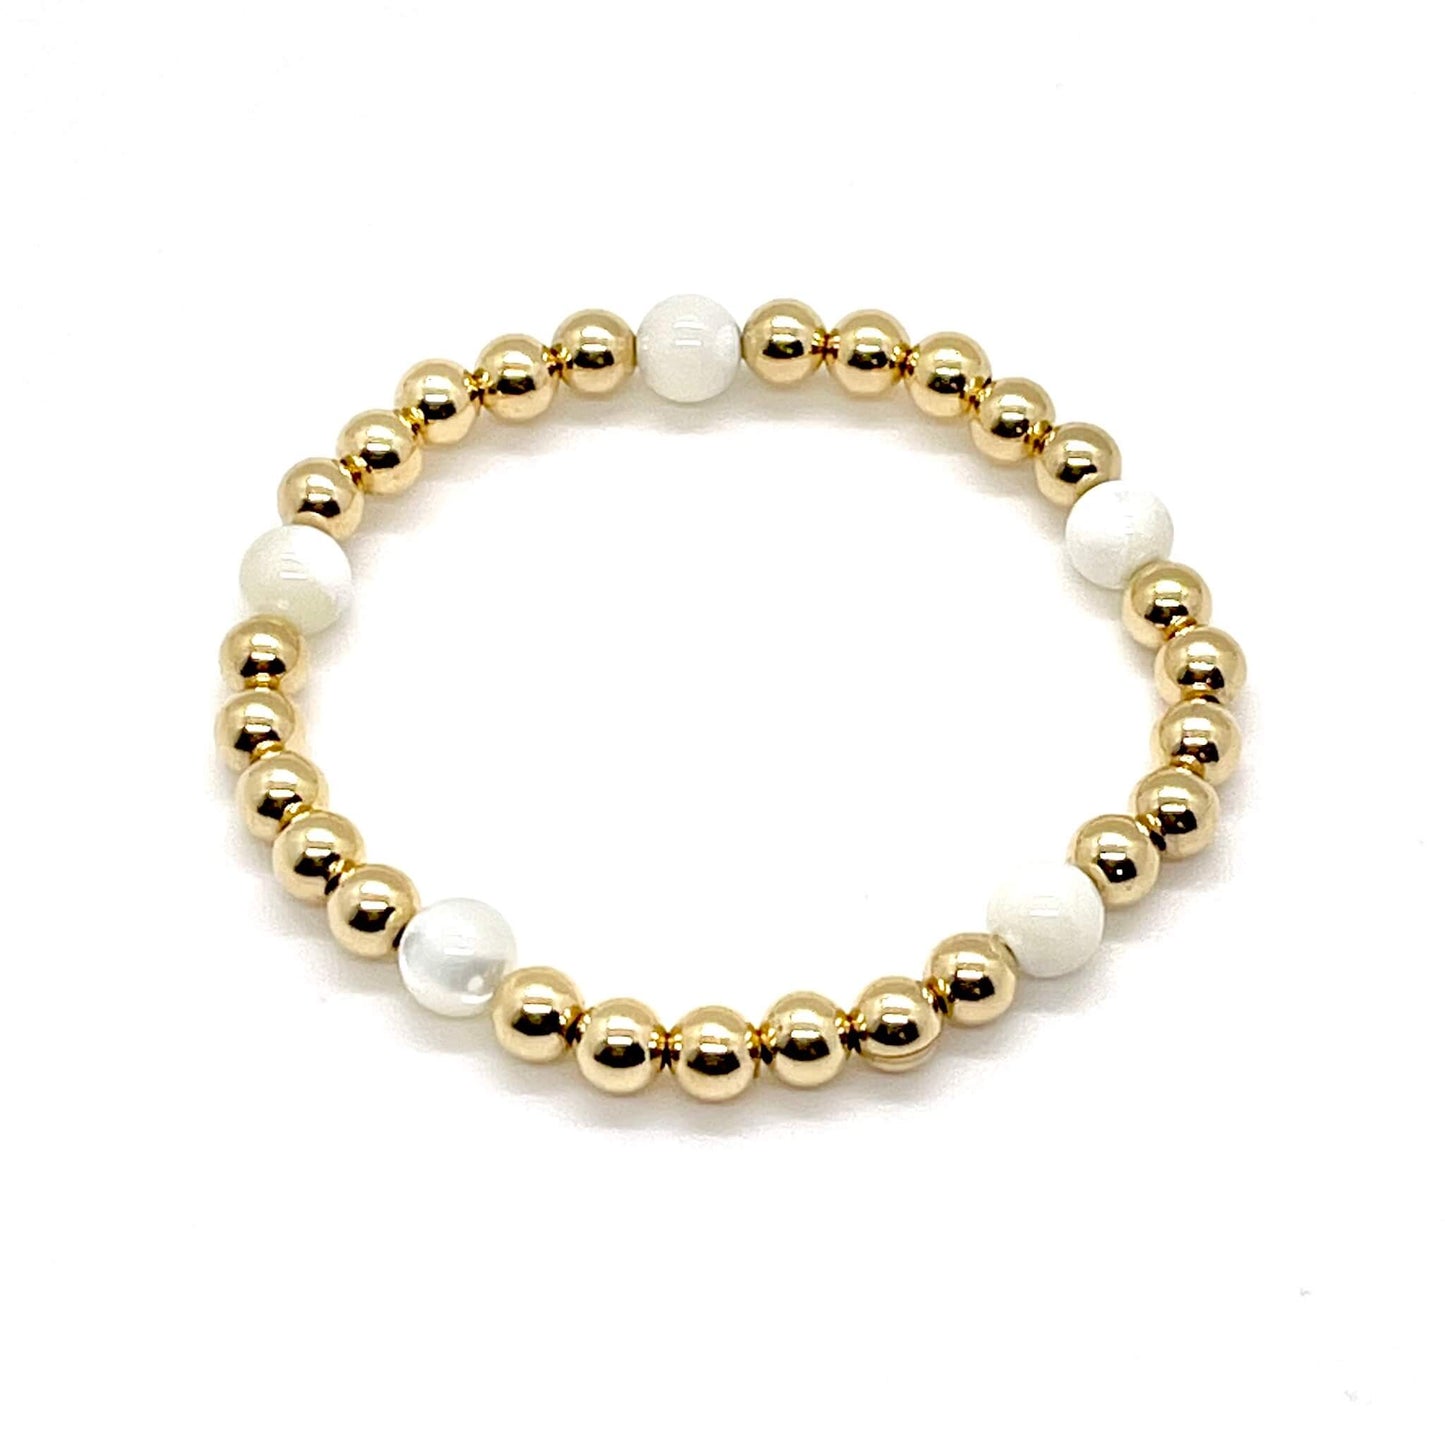 Bracelet with pearl and gold beads. 14K gold filled 5mm beads and 6mm mother-of-pearl beads.